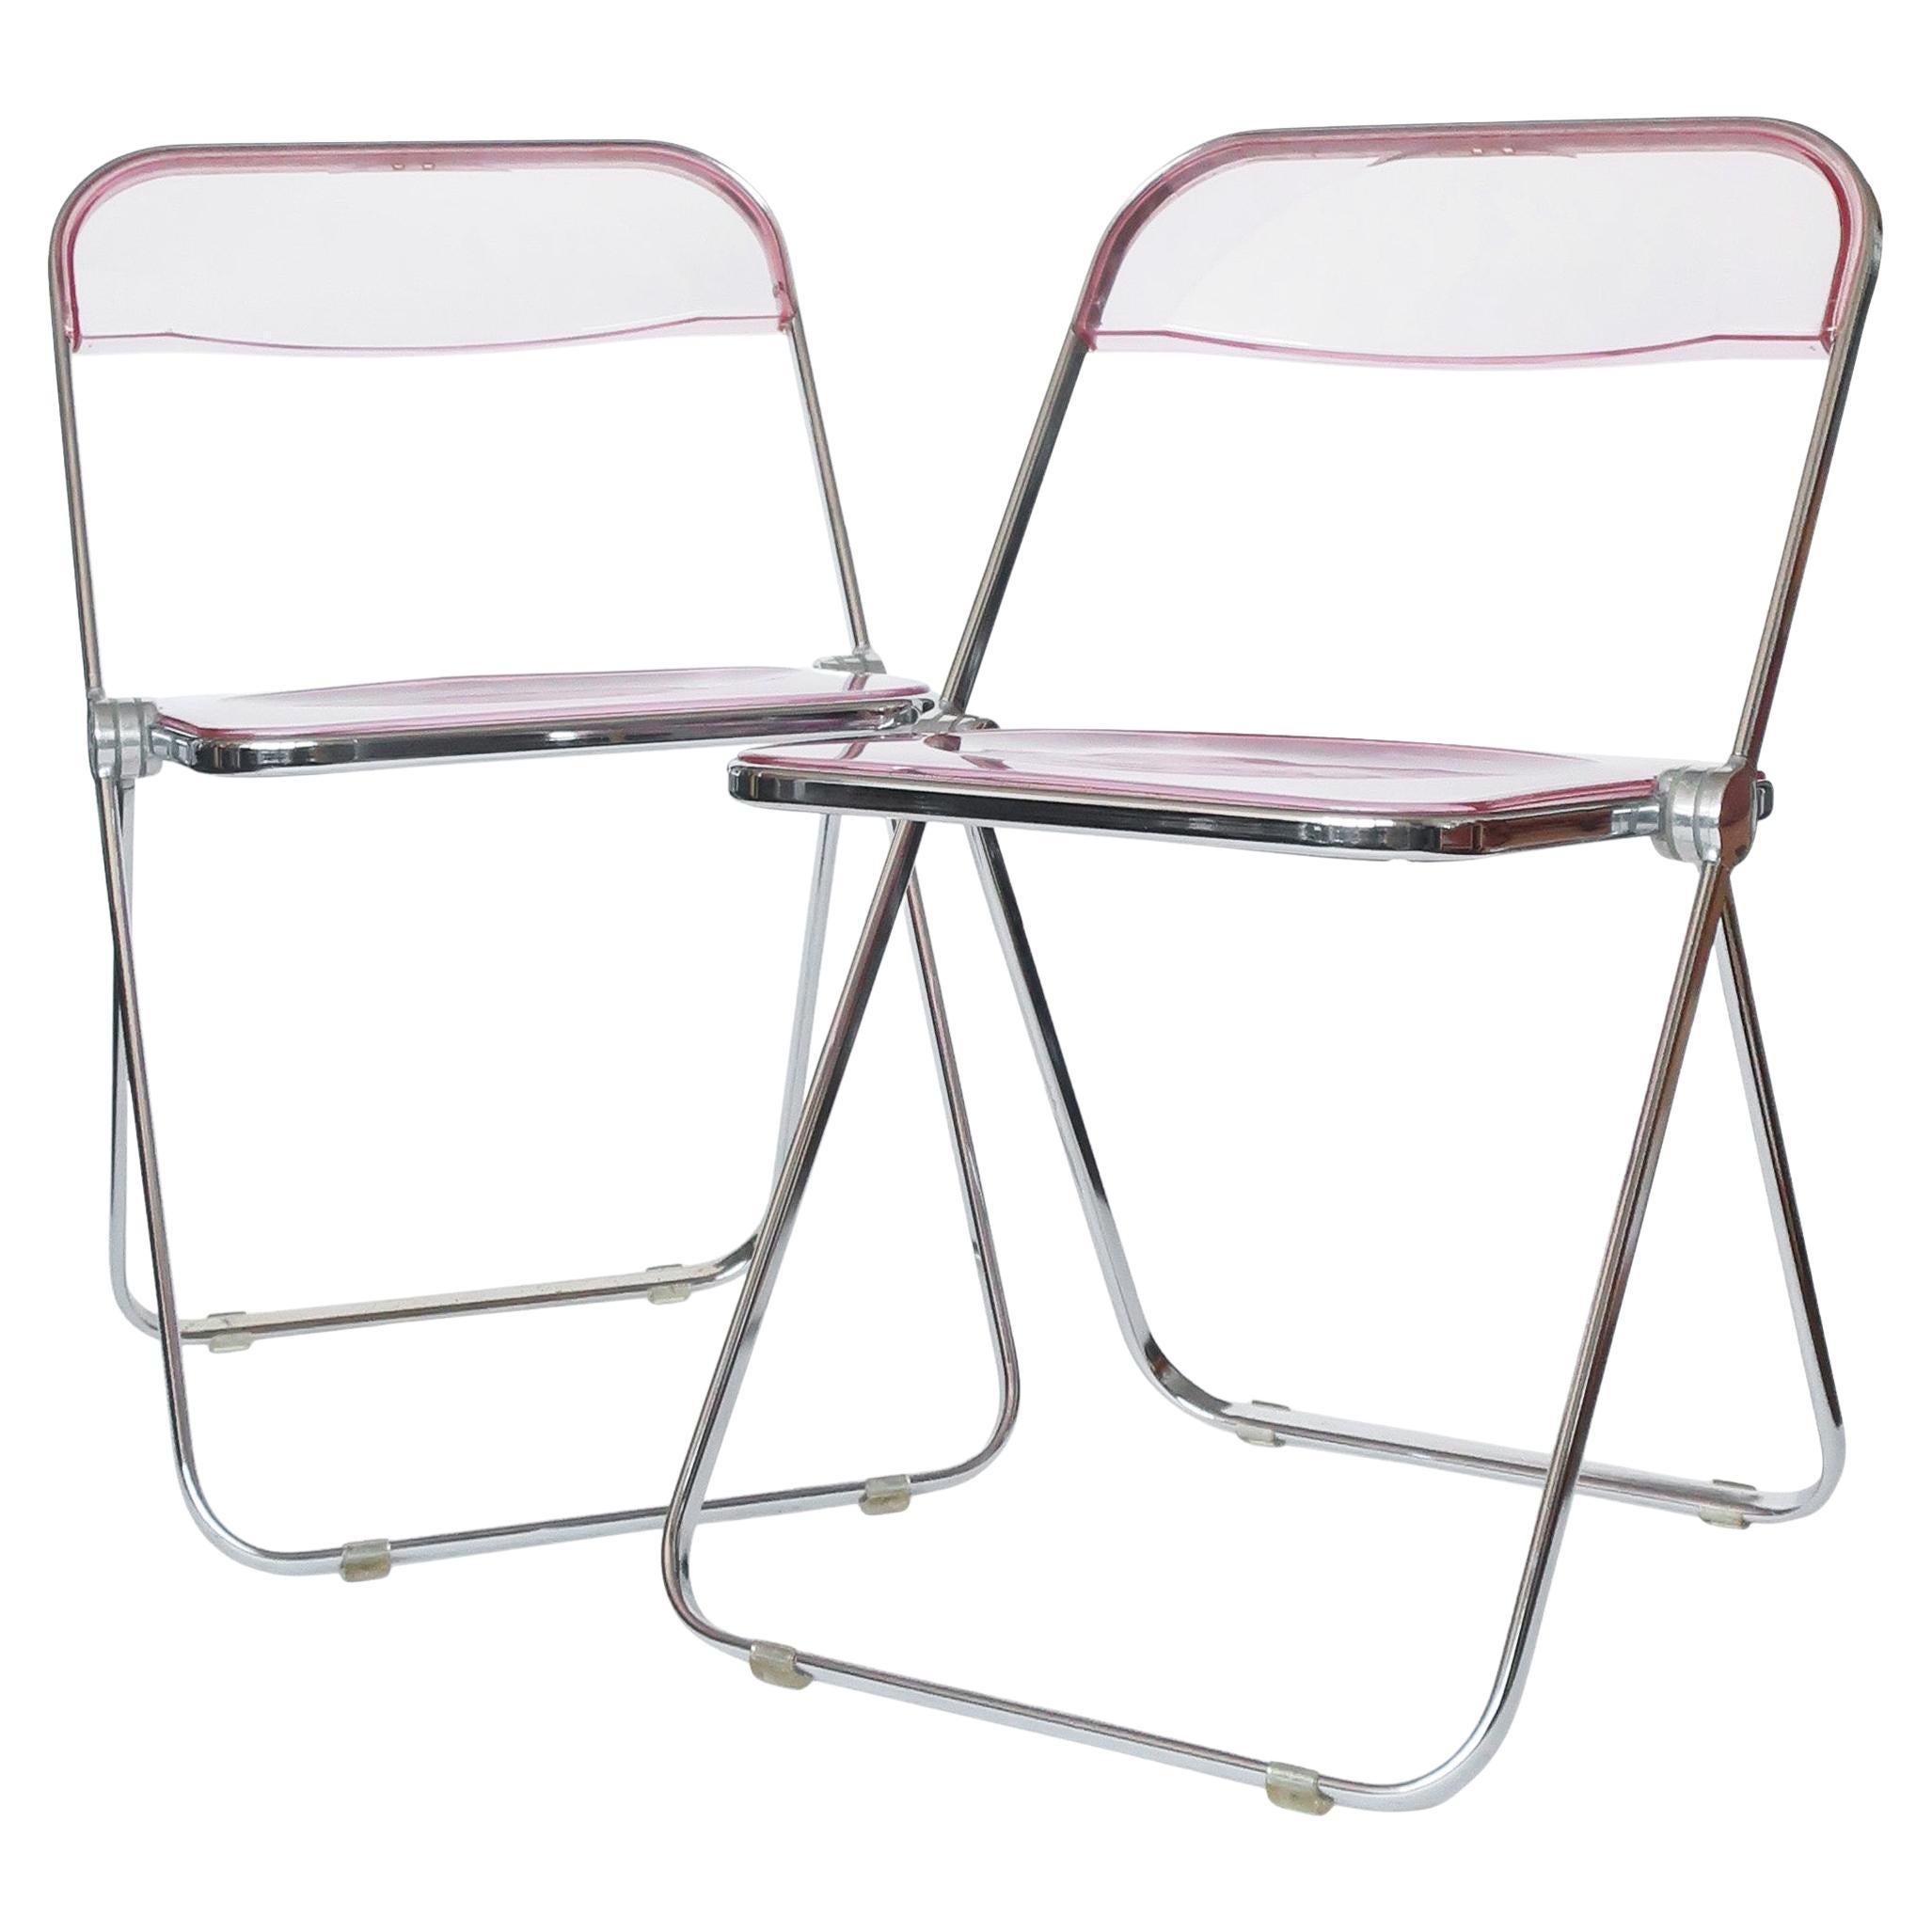 Pair of Plia Pink Folding Chairs by Giancarlo Piretti for Castelli